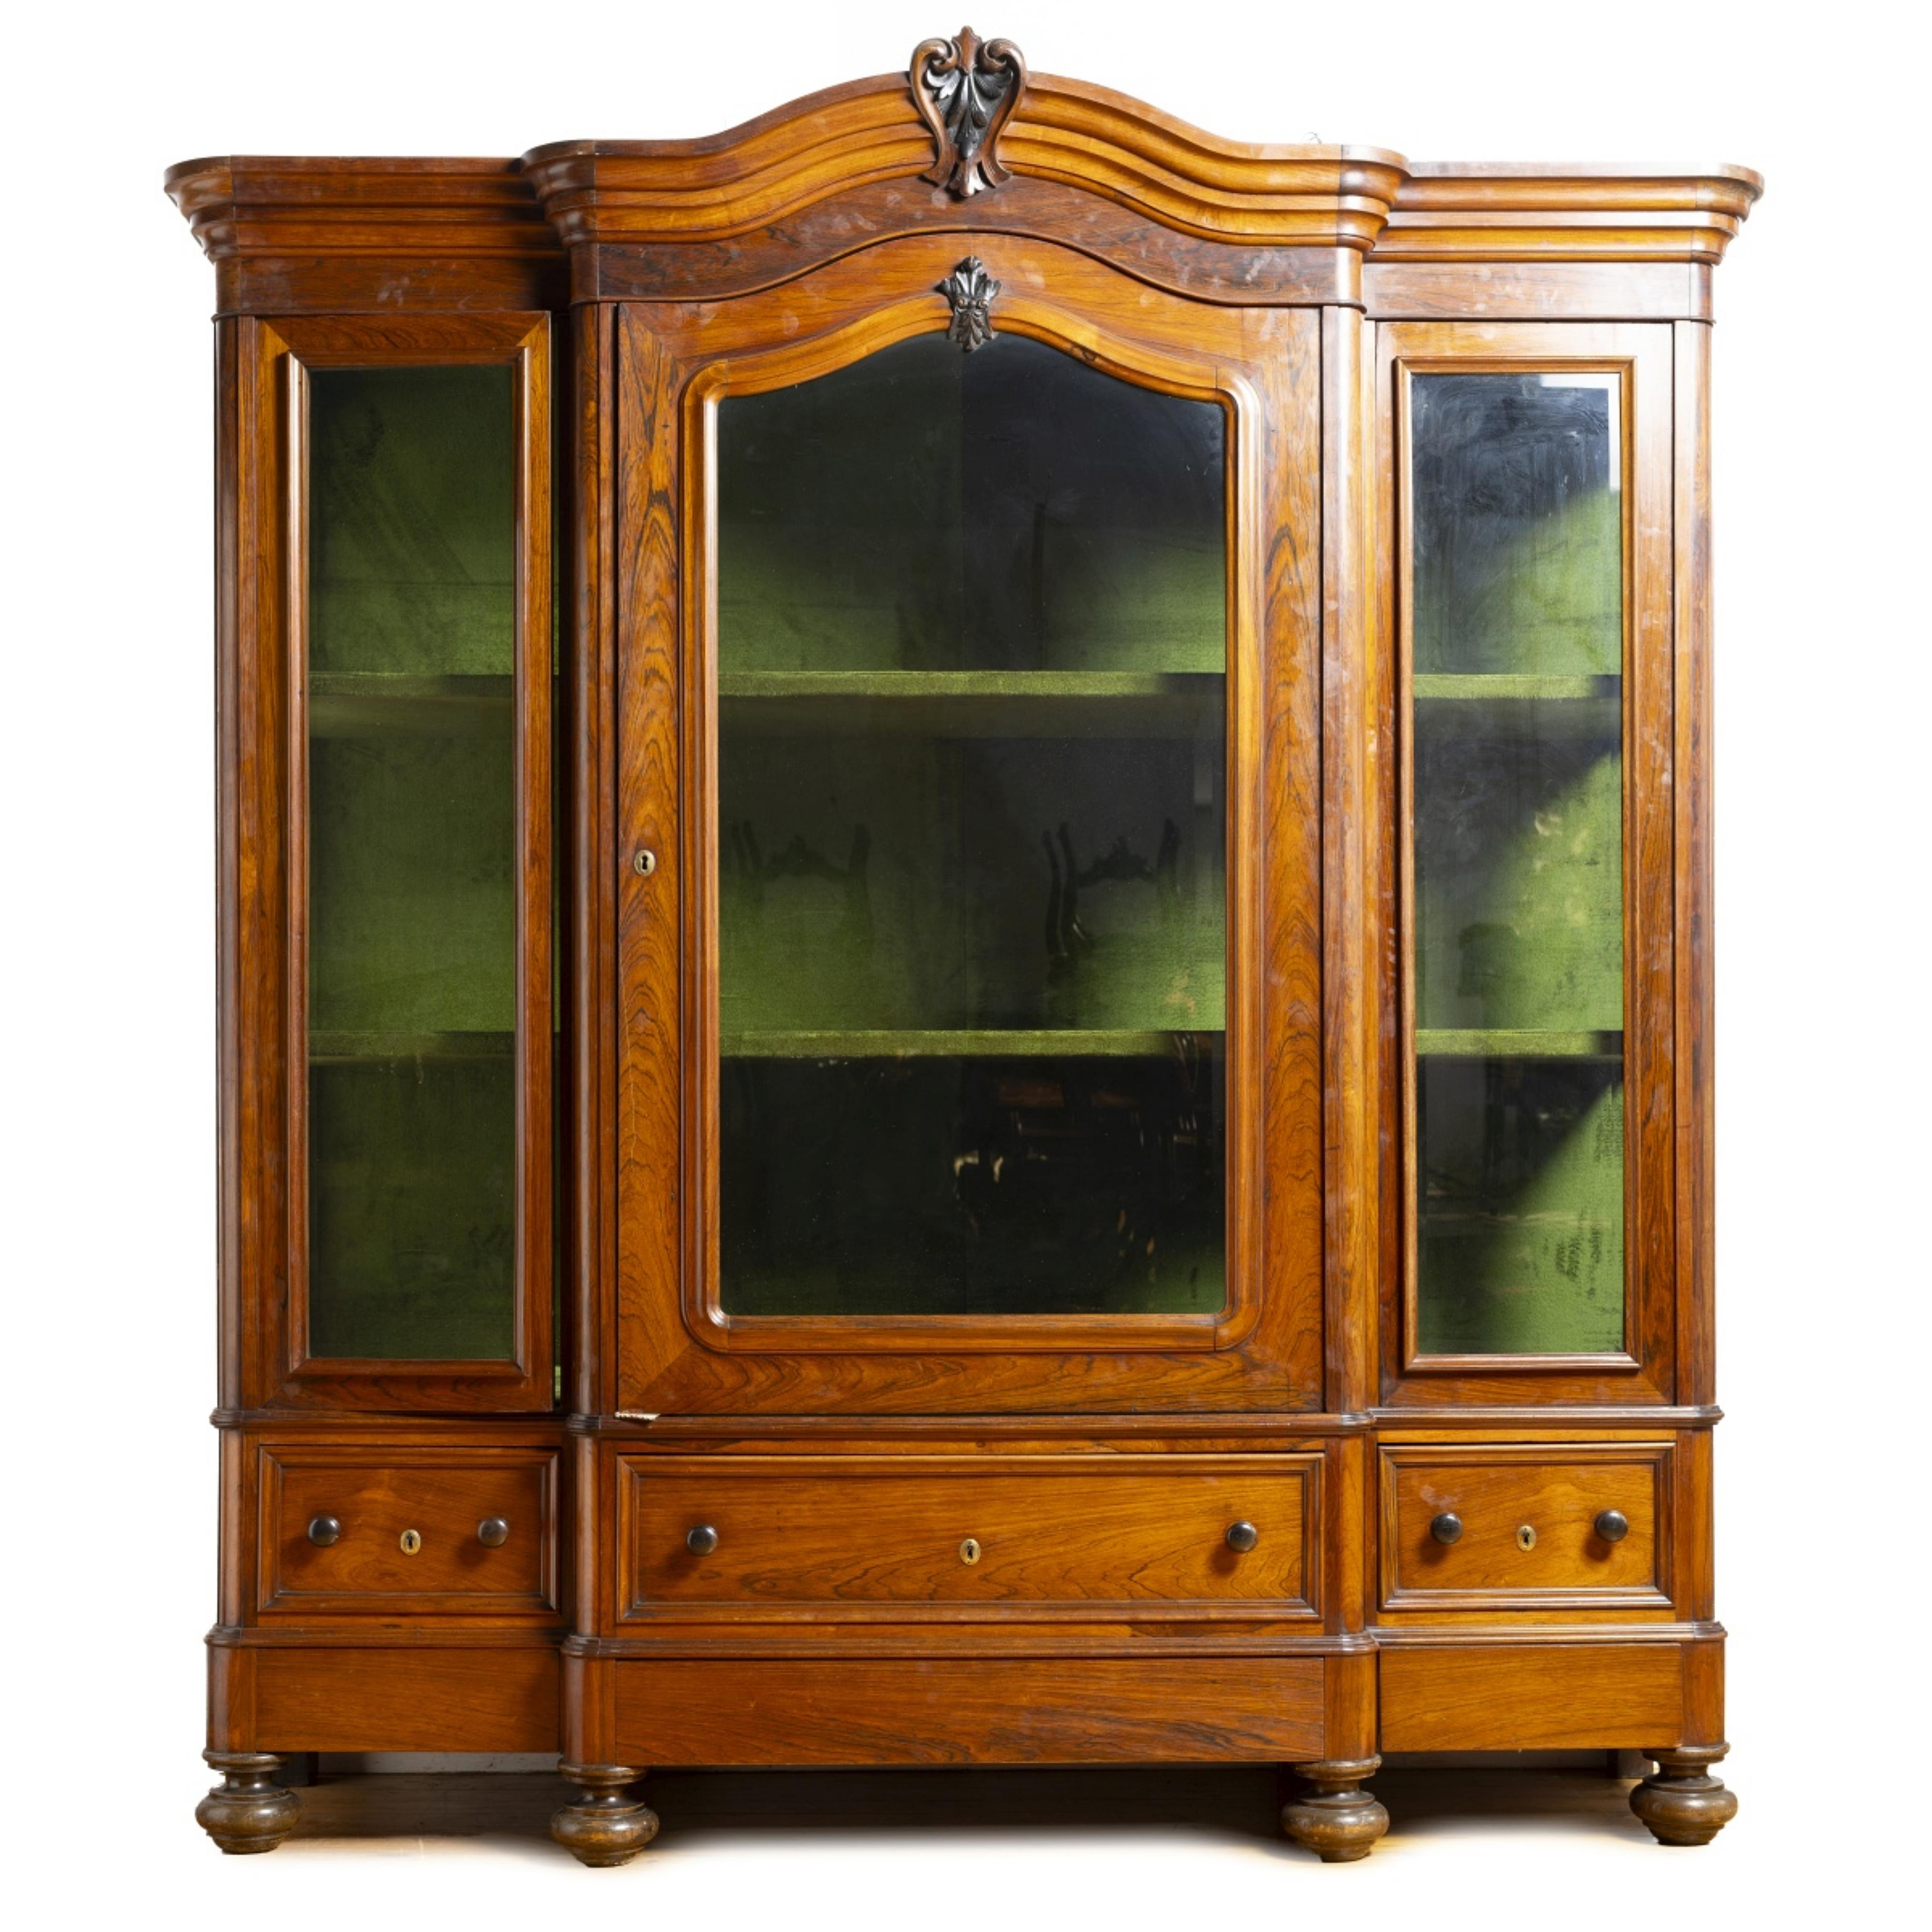 Portuguese IMPORTANT LARGE DISPLAY PORTUGUESE CABINET 19th Century  Rosewood Wood For Sale